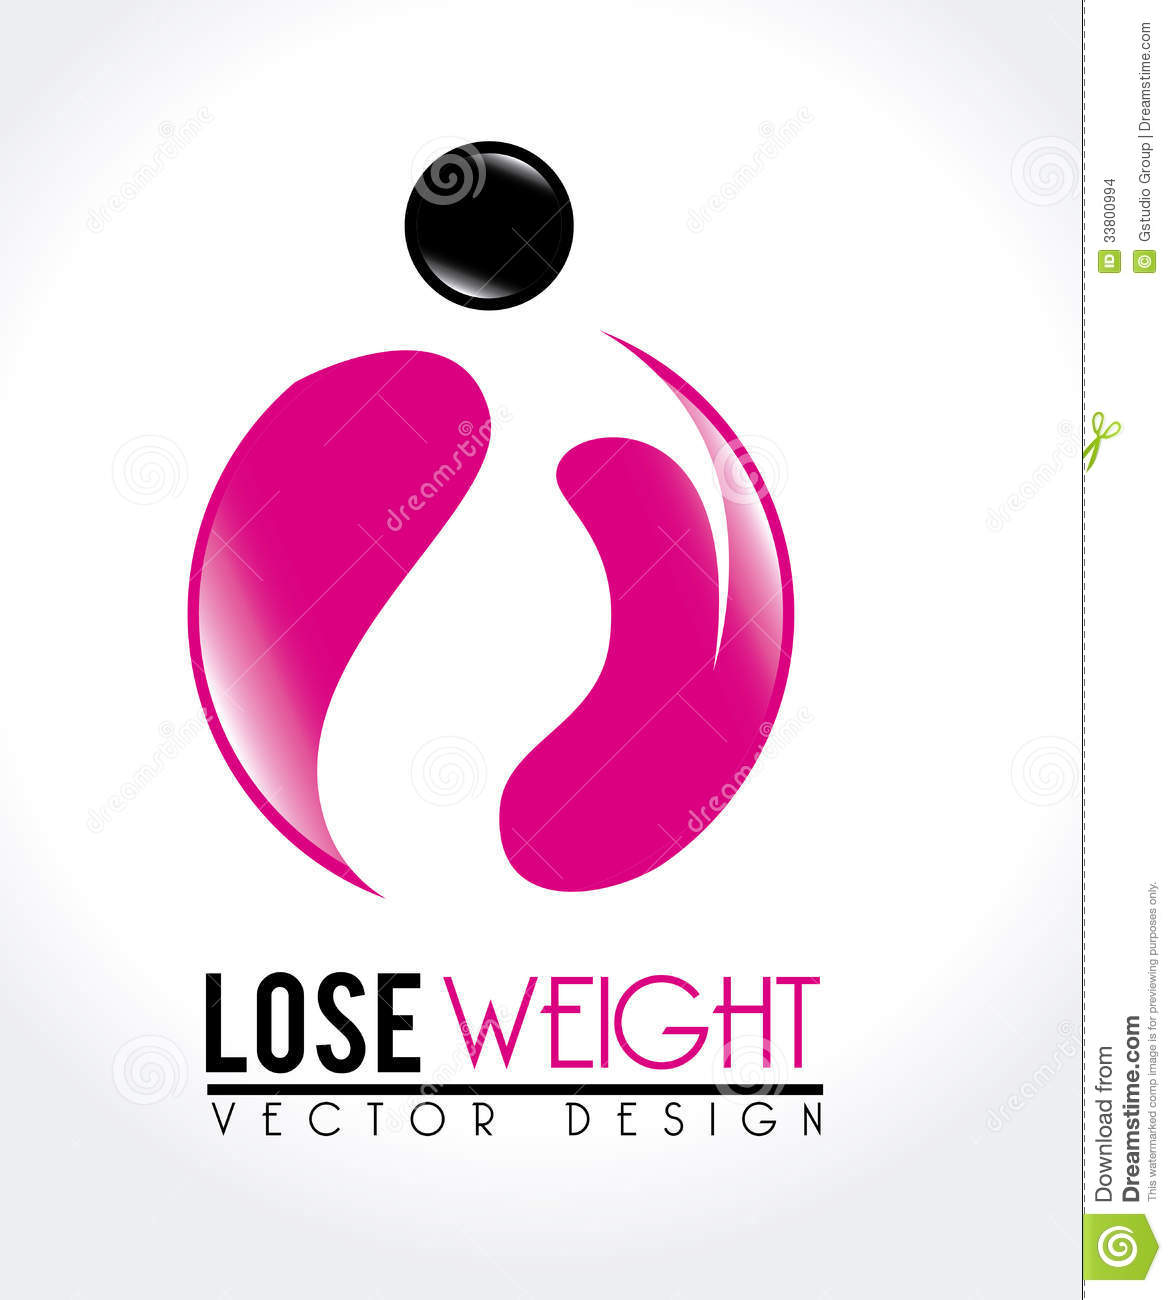 Lose Weight Design Over White Background Vector Illustration